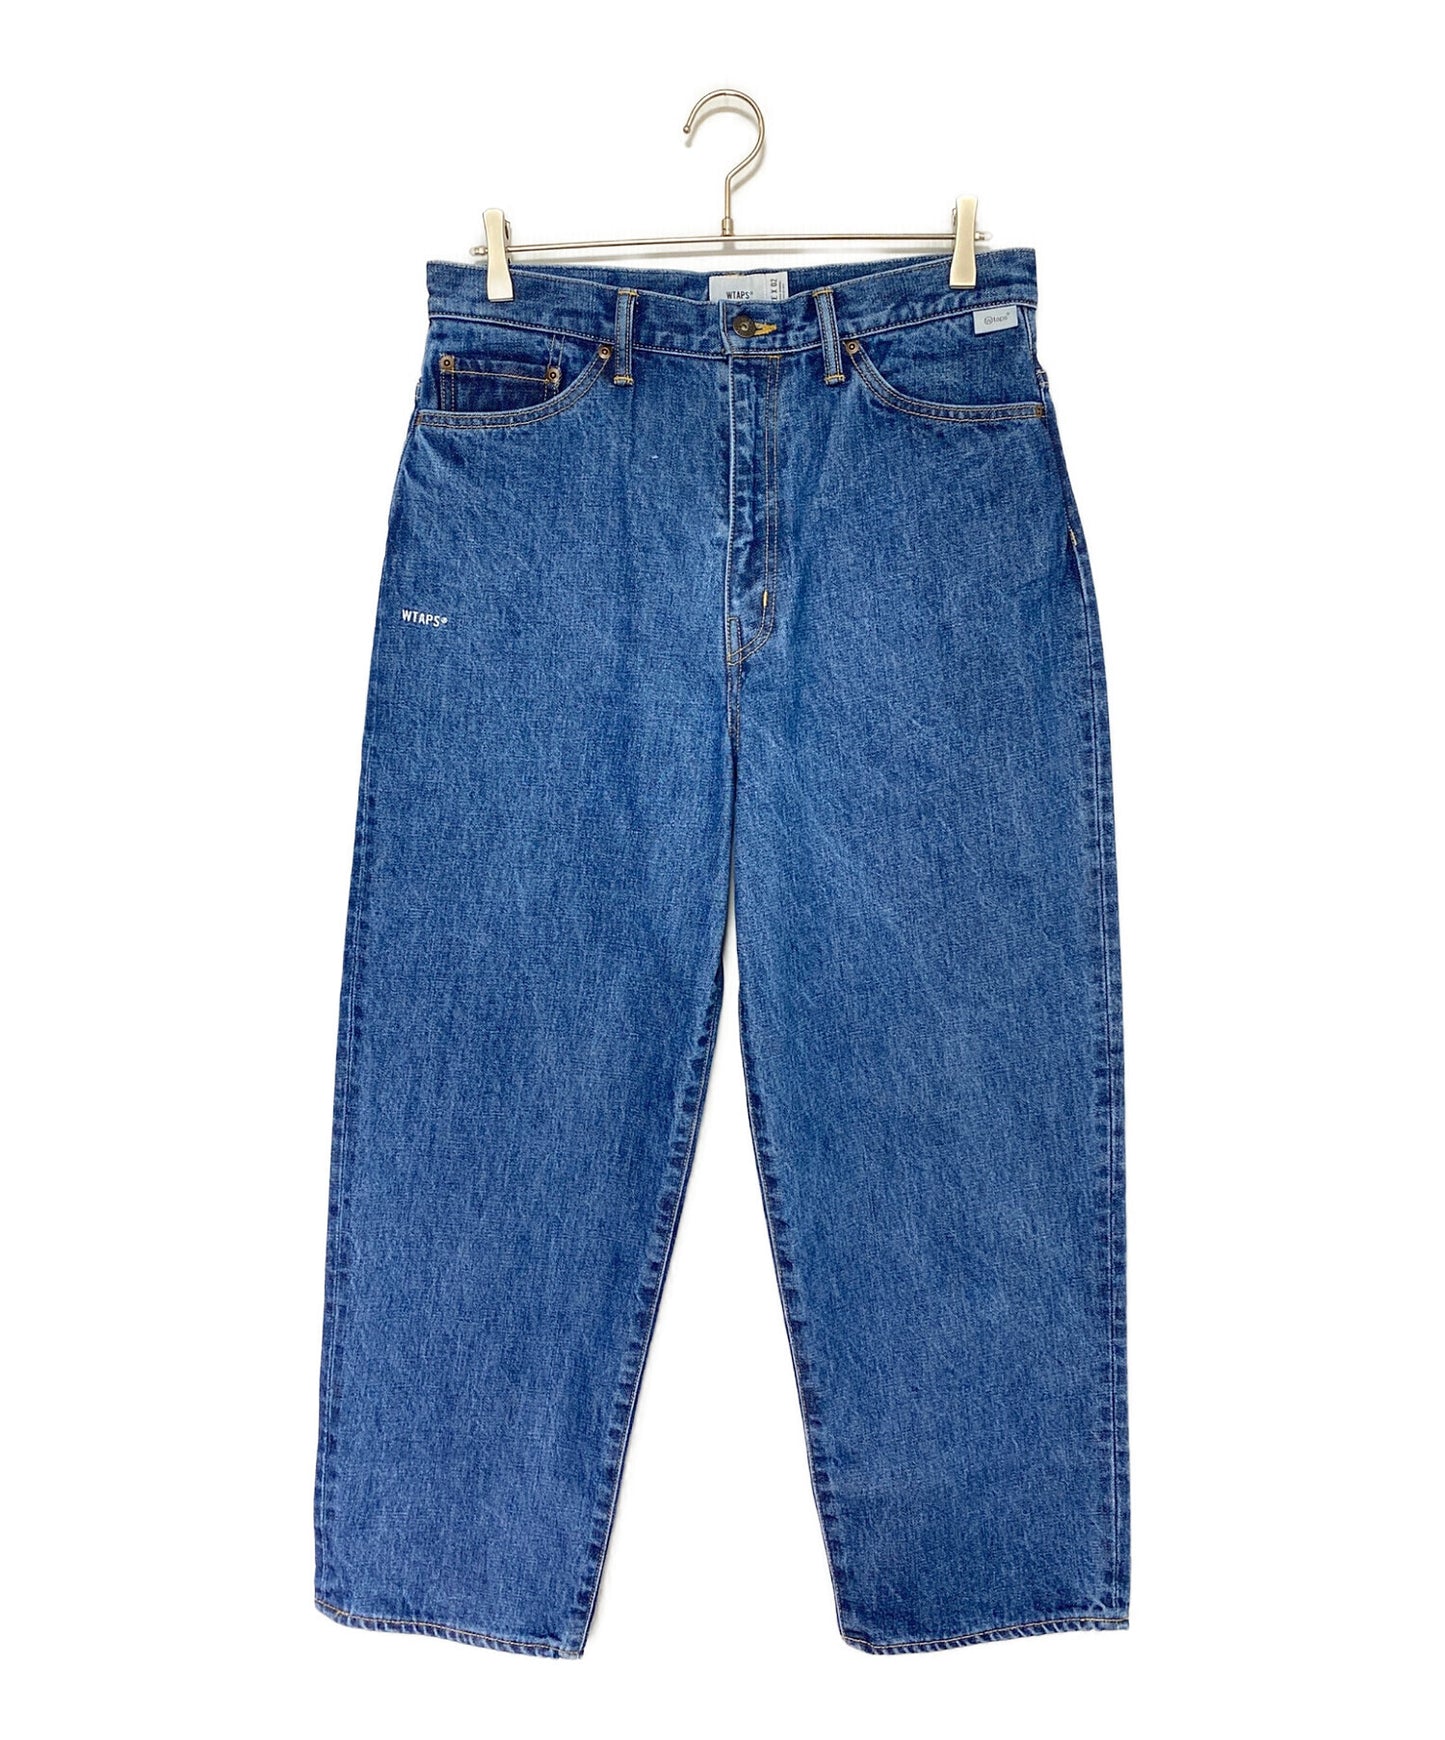 [Pre-owned] WTAPS BLUES STRAIGHT / TROUSERS / COTTON. DENIM. CACTO ( Blue straight trousers cotton denim cacto ) 241wvdt-ptm03